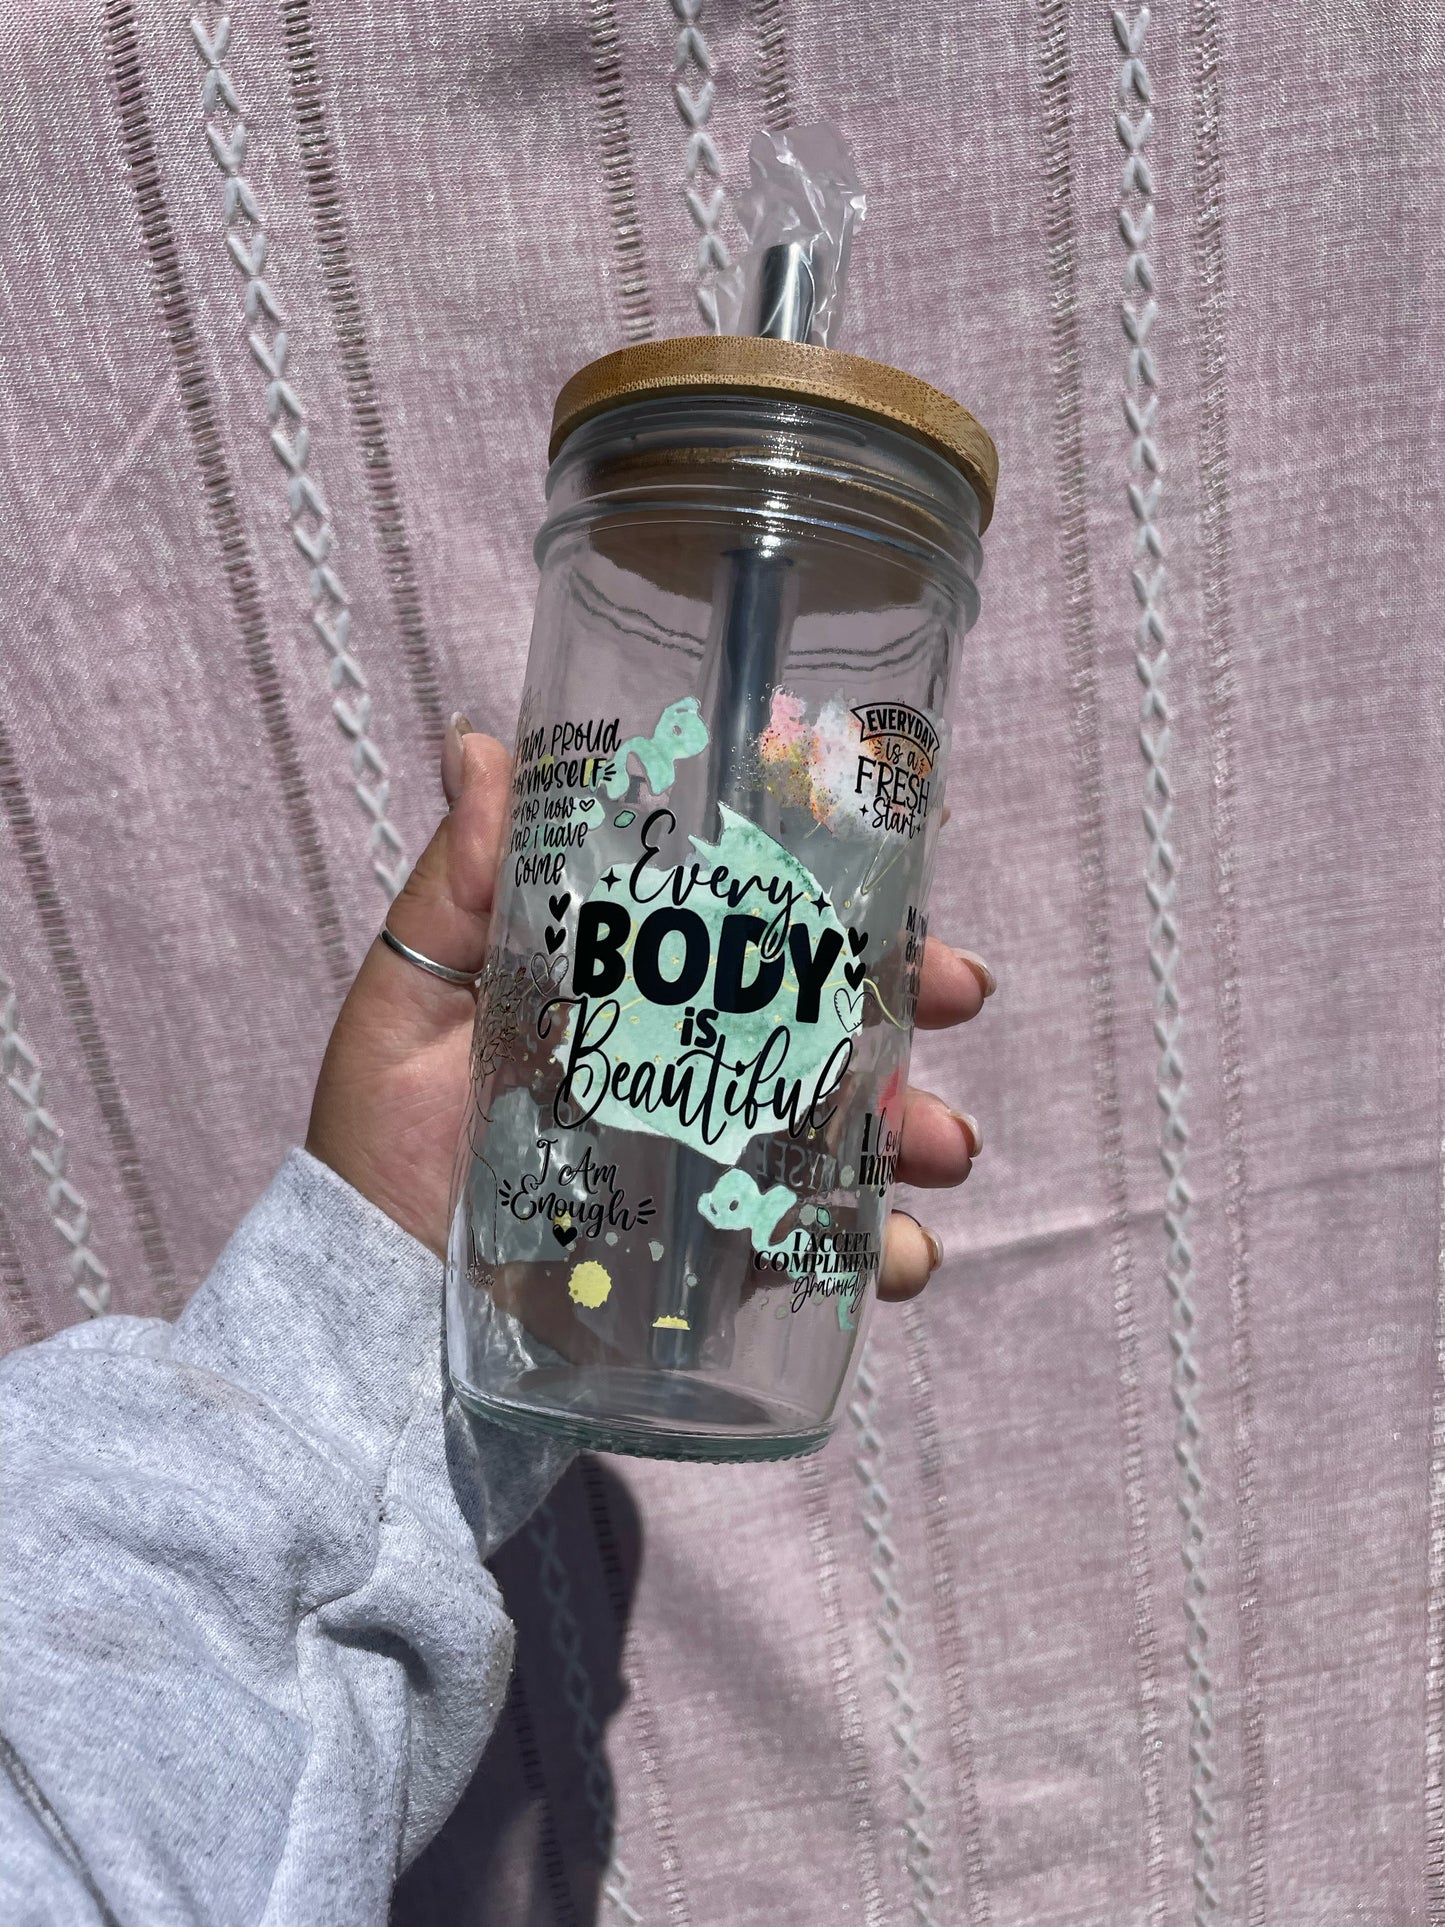 Every Body is Beautiful Affirmation Glass Cups- Smoothie Cup. Bubble Tea. Aesthetic Cup. 24 OZ.